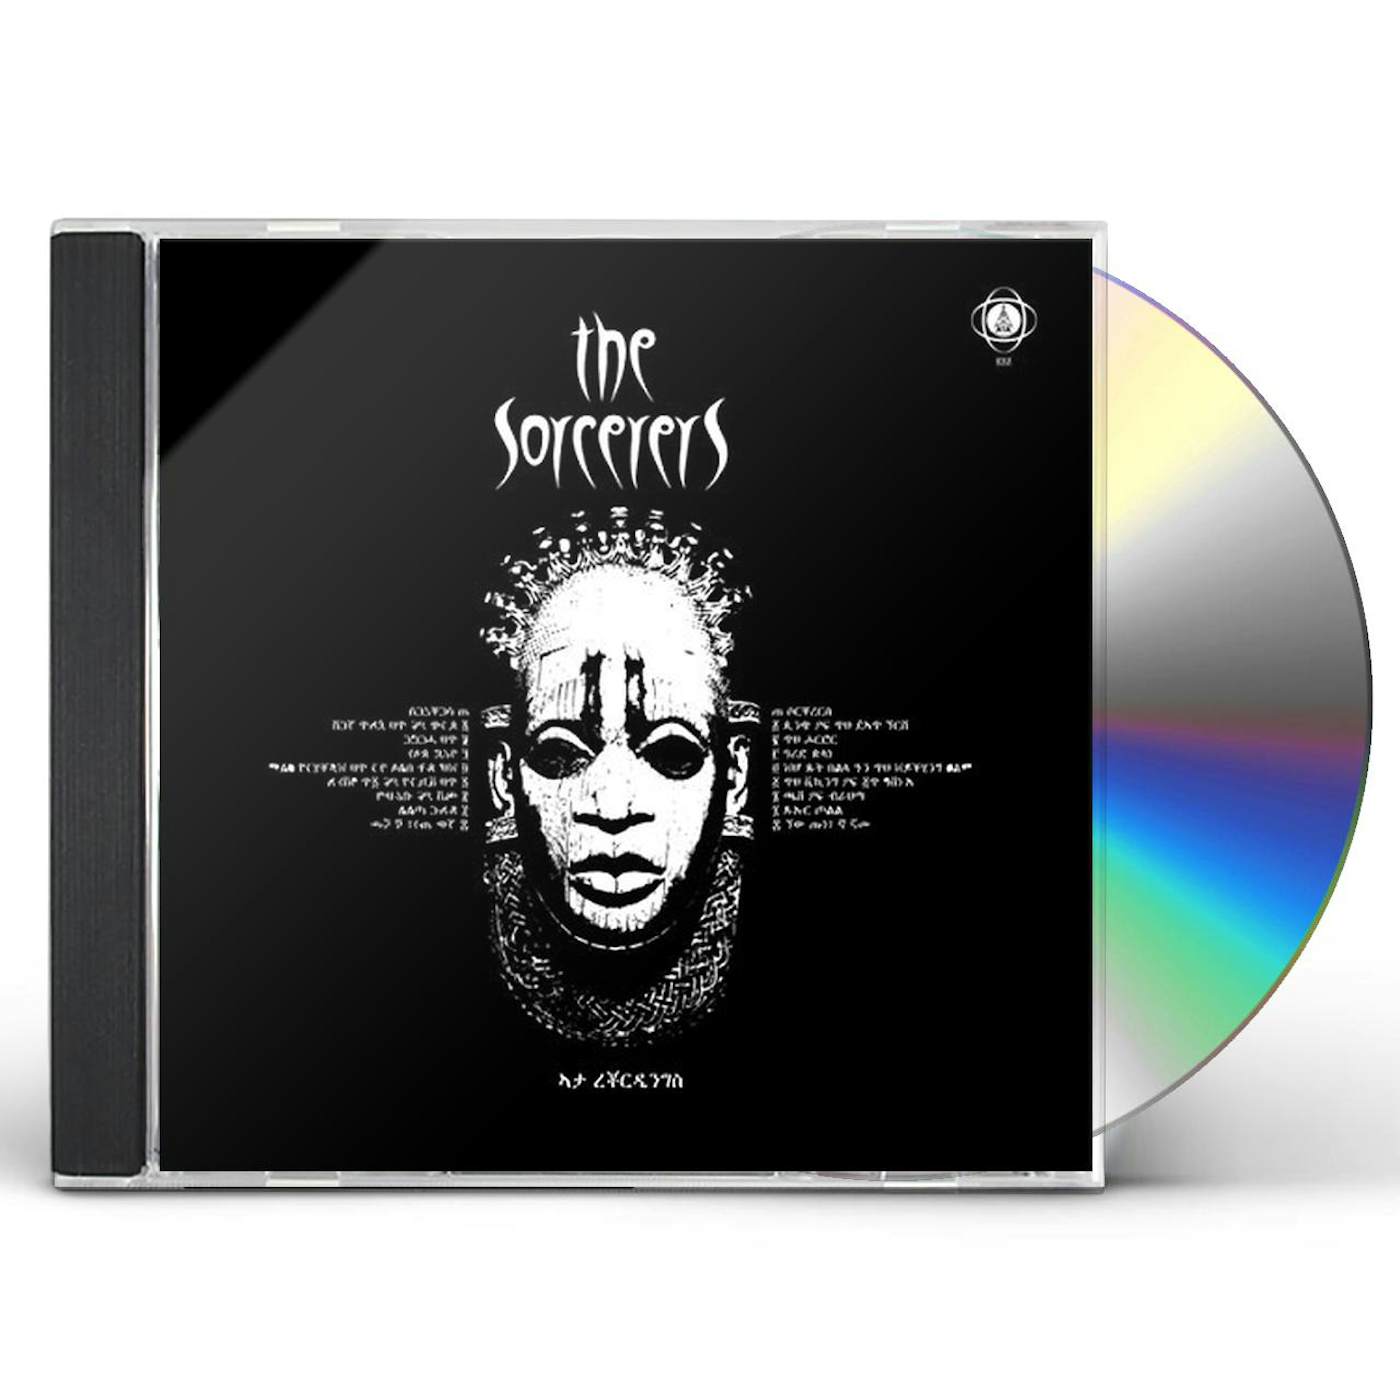 The Sorcerers CD